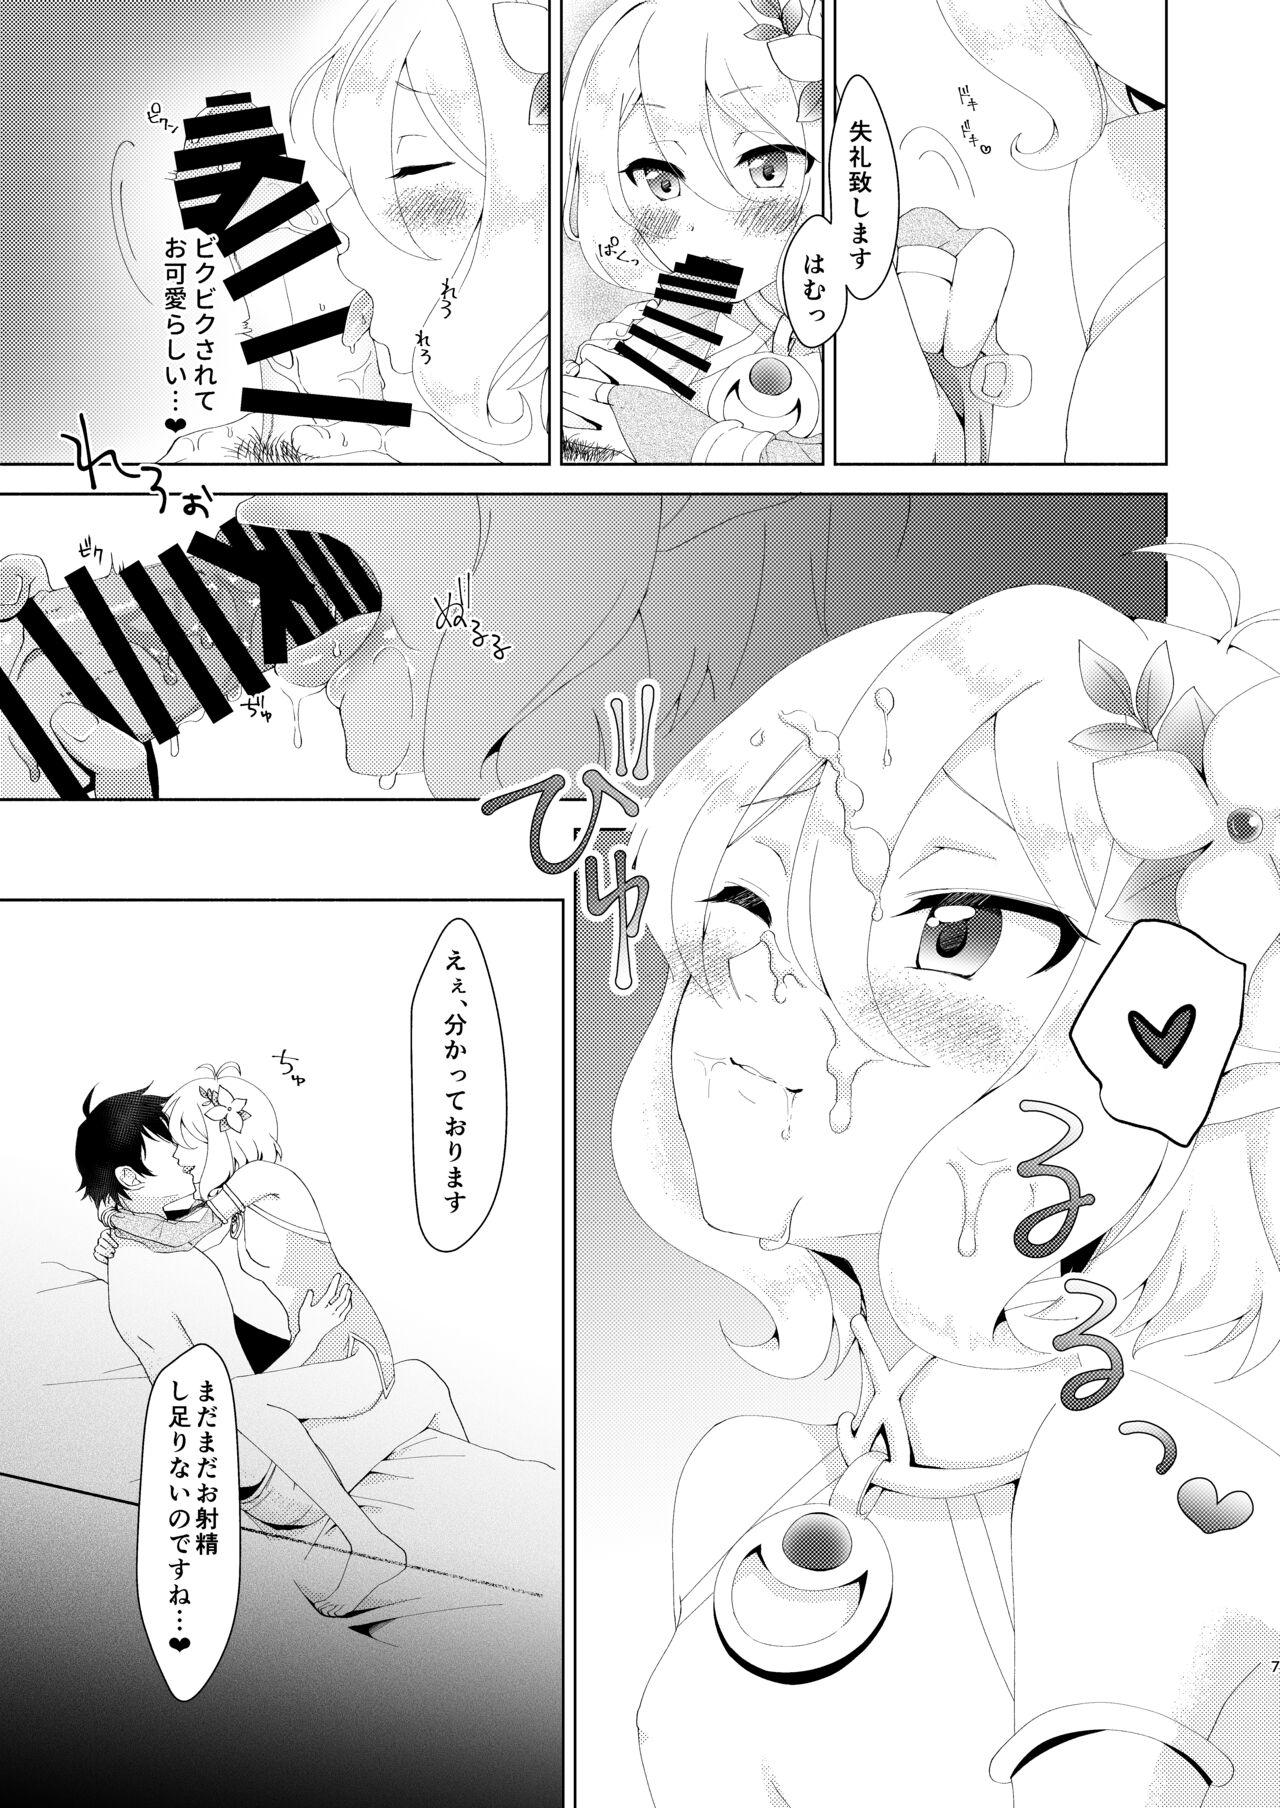 Sapphicerotica Yandere Connect - Princess connect Selfie - Page 5